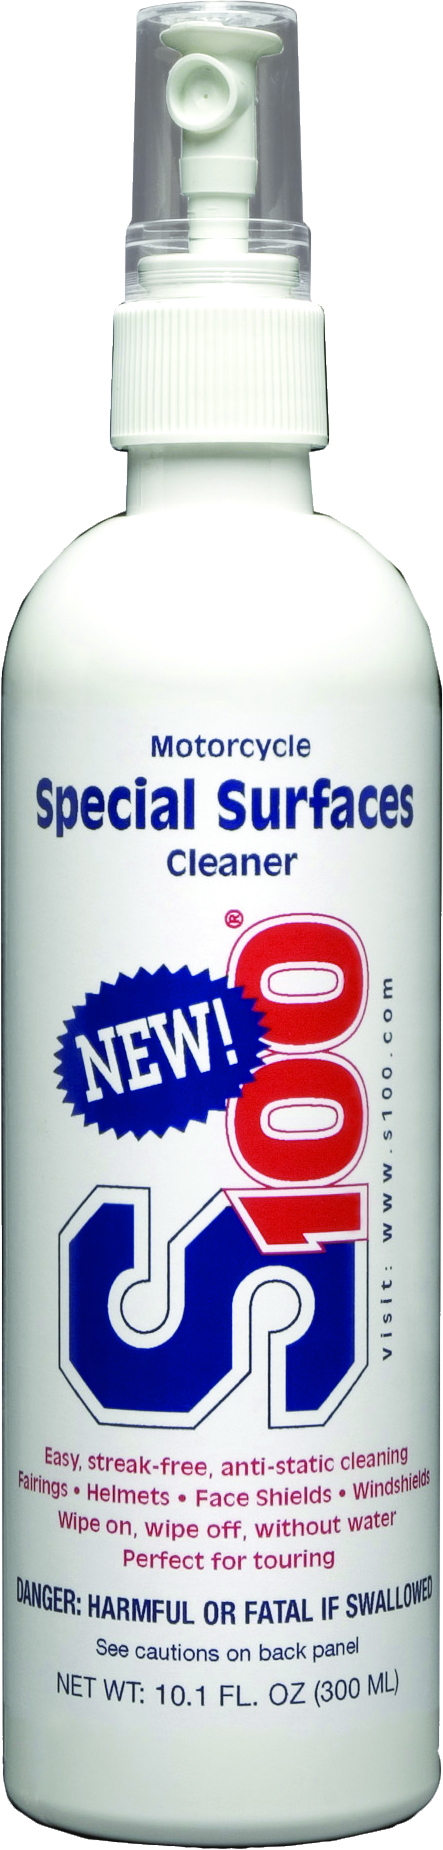 Special Surfaces Cleaner Image